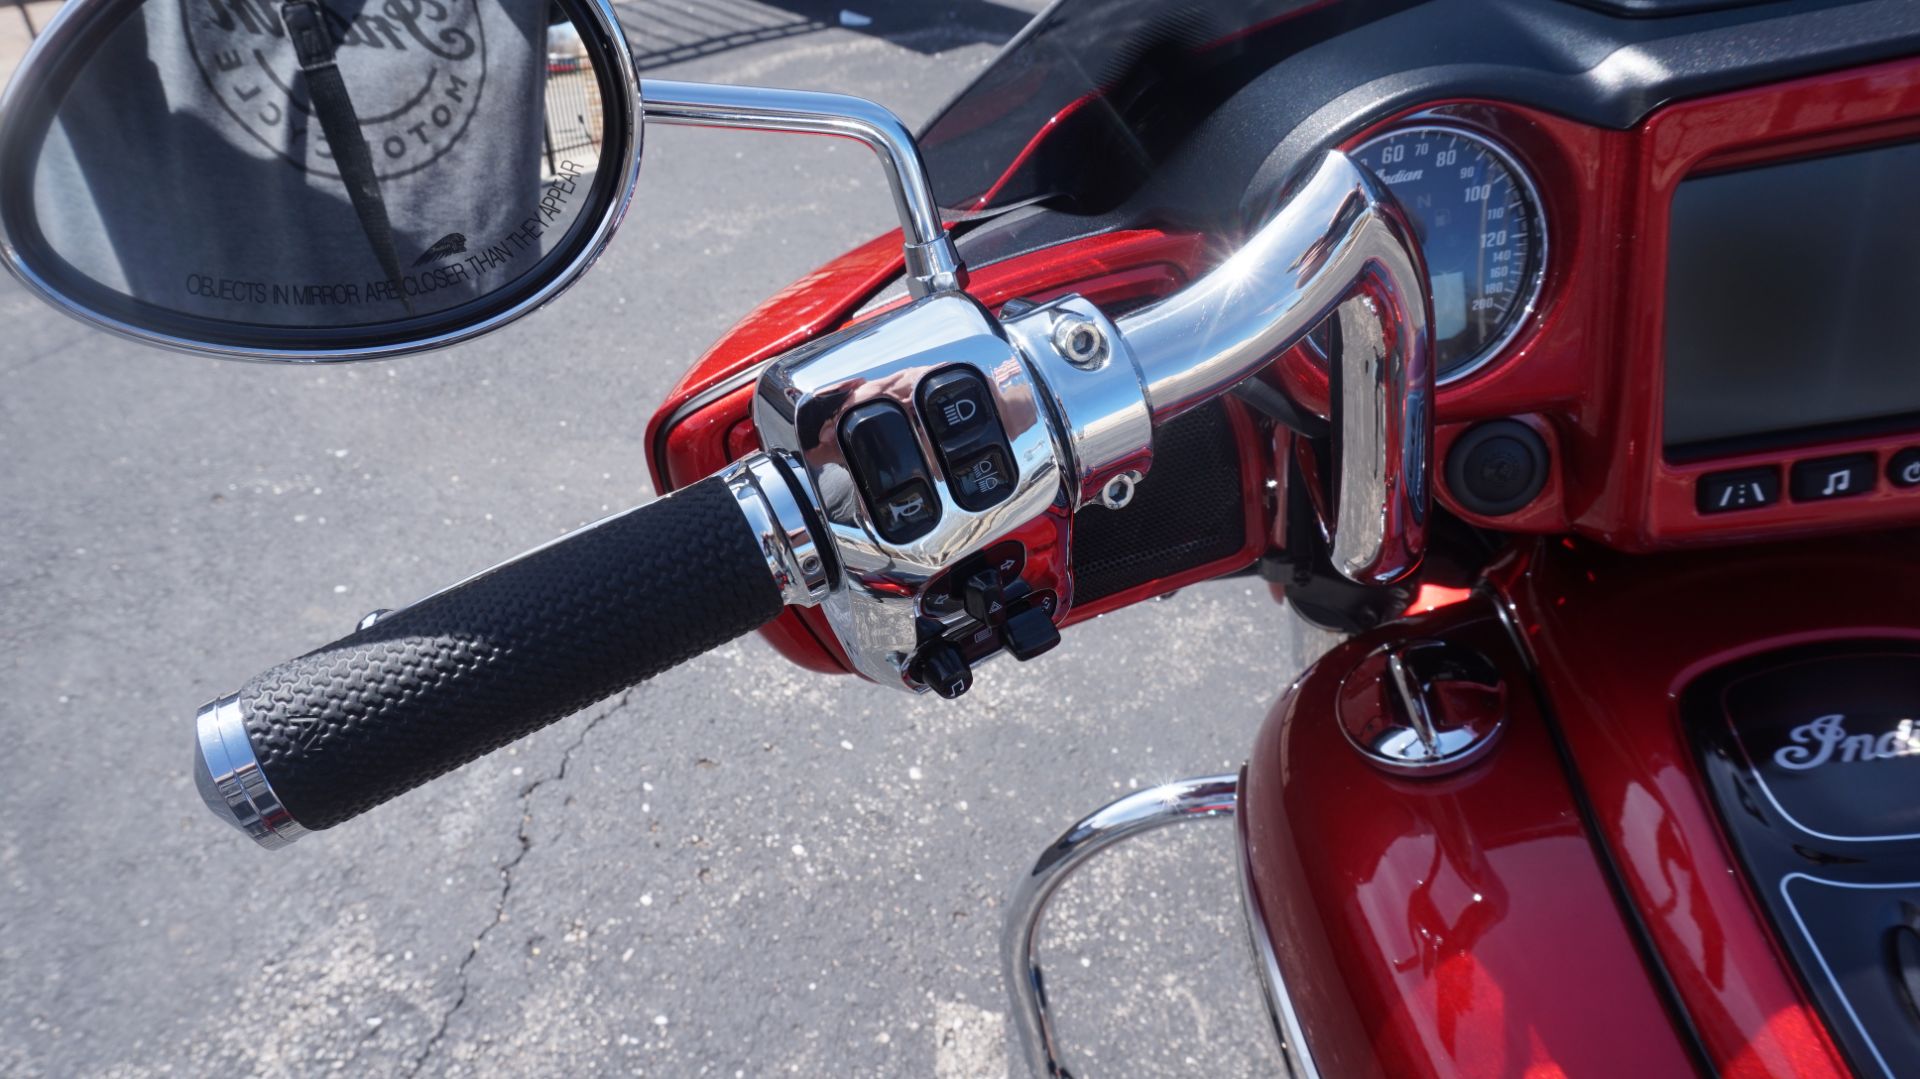 2019 Indian Motorcycle Chieftain® Limited ABS in Racine, Wisconsin - Photo 49